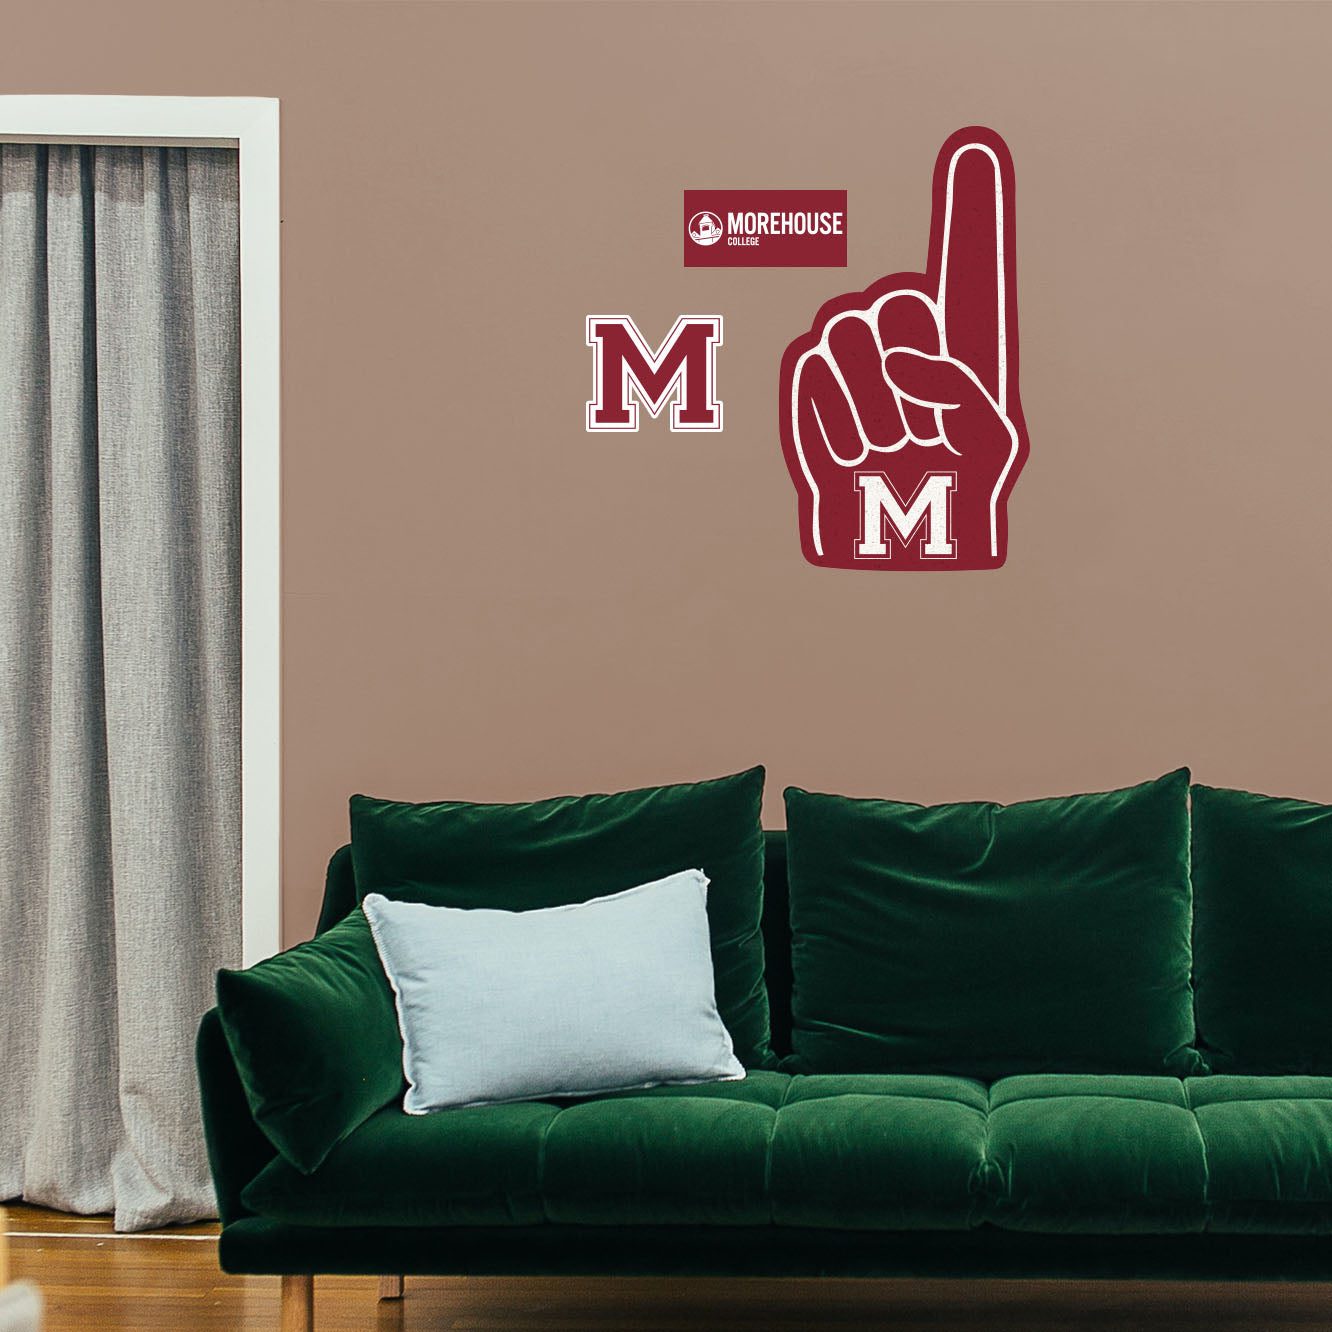 Morehouse Maroon Tigers: Foam Finger - Officially Licensed NCAA Removable Adhesive Decal